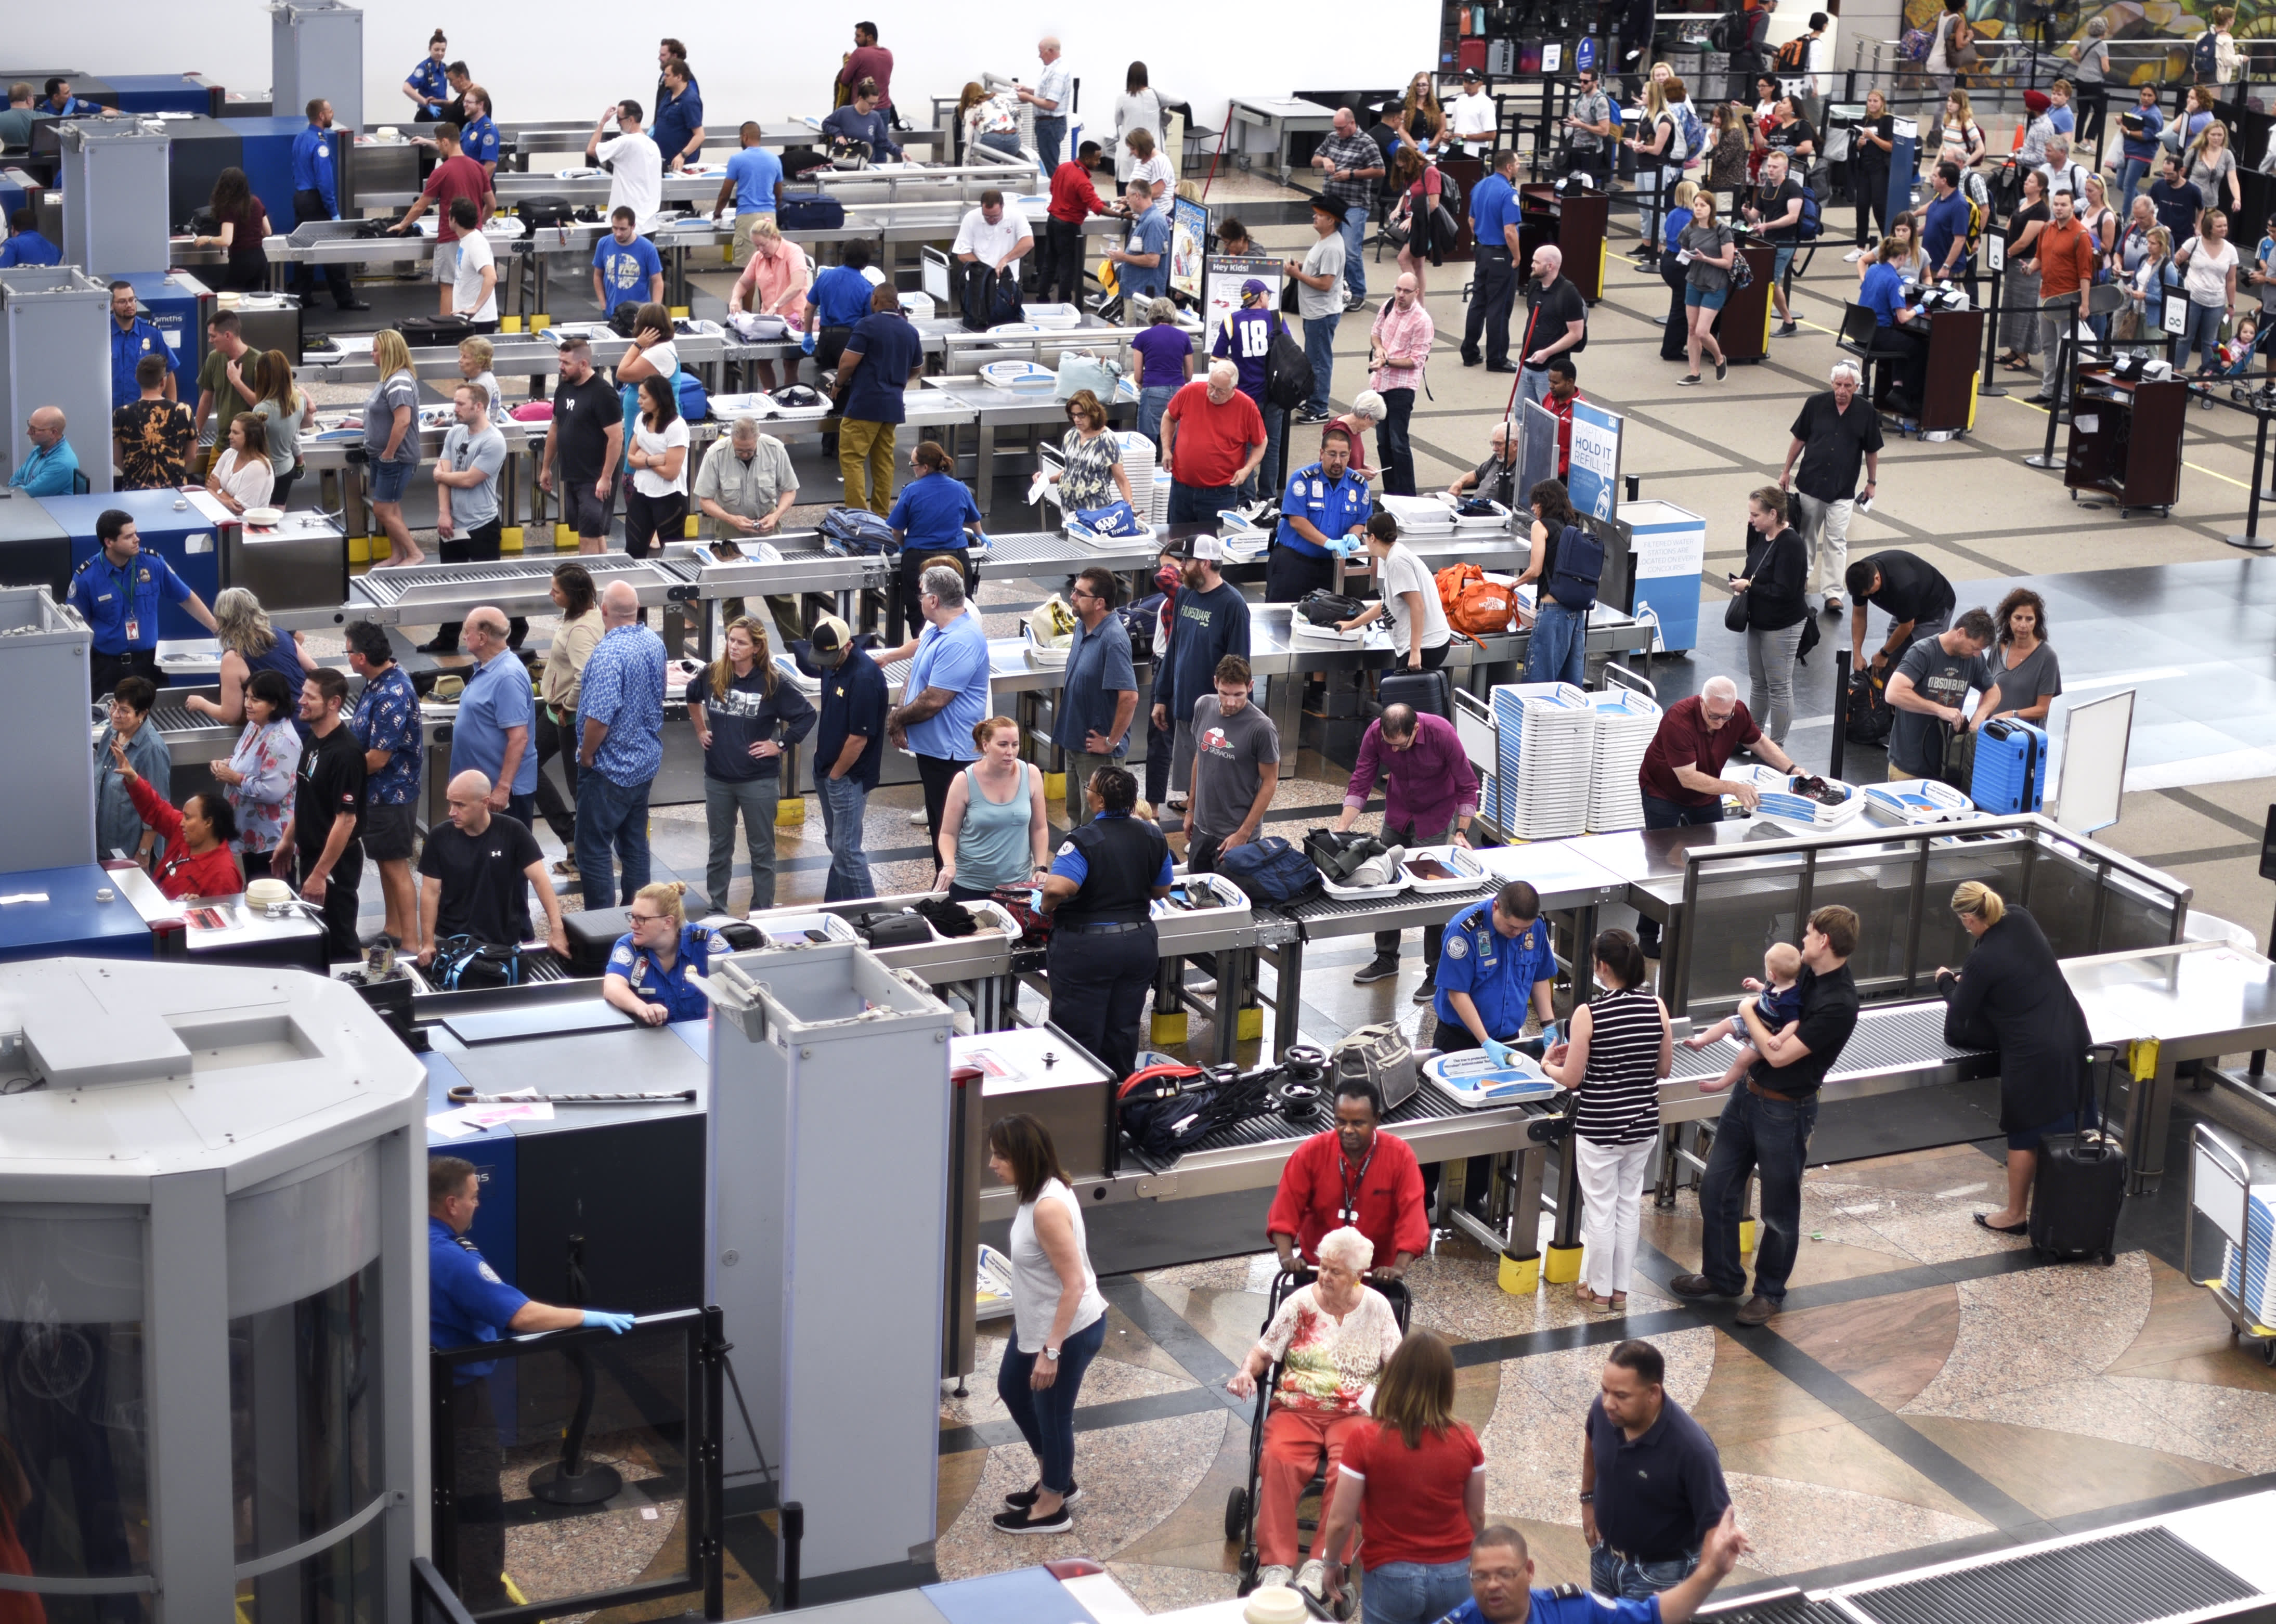 Holiday weekend air travel surges to highest levels since Thanksgiving as Covid cases continue to drop